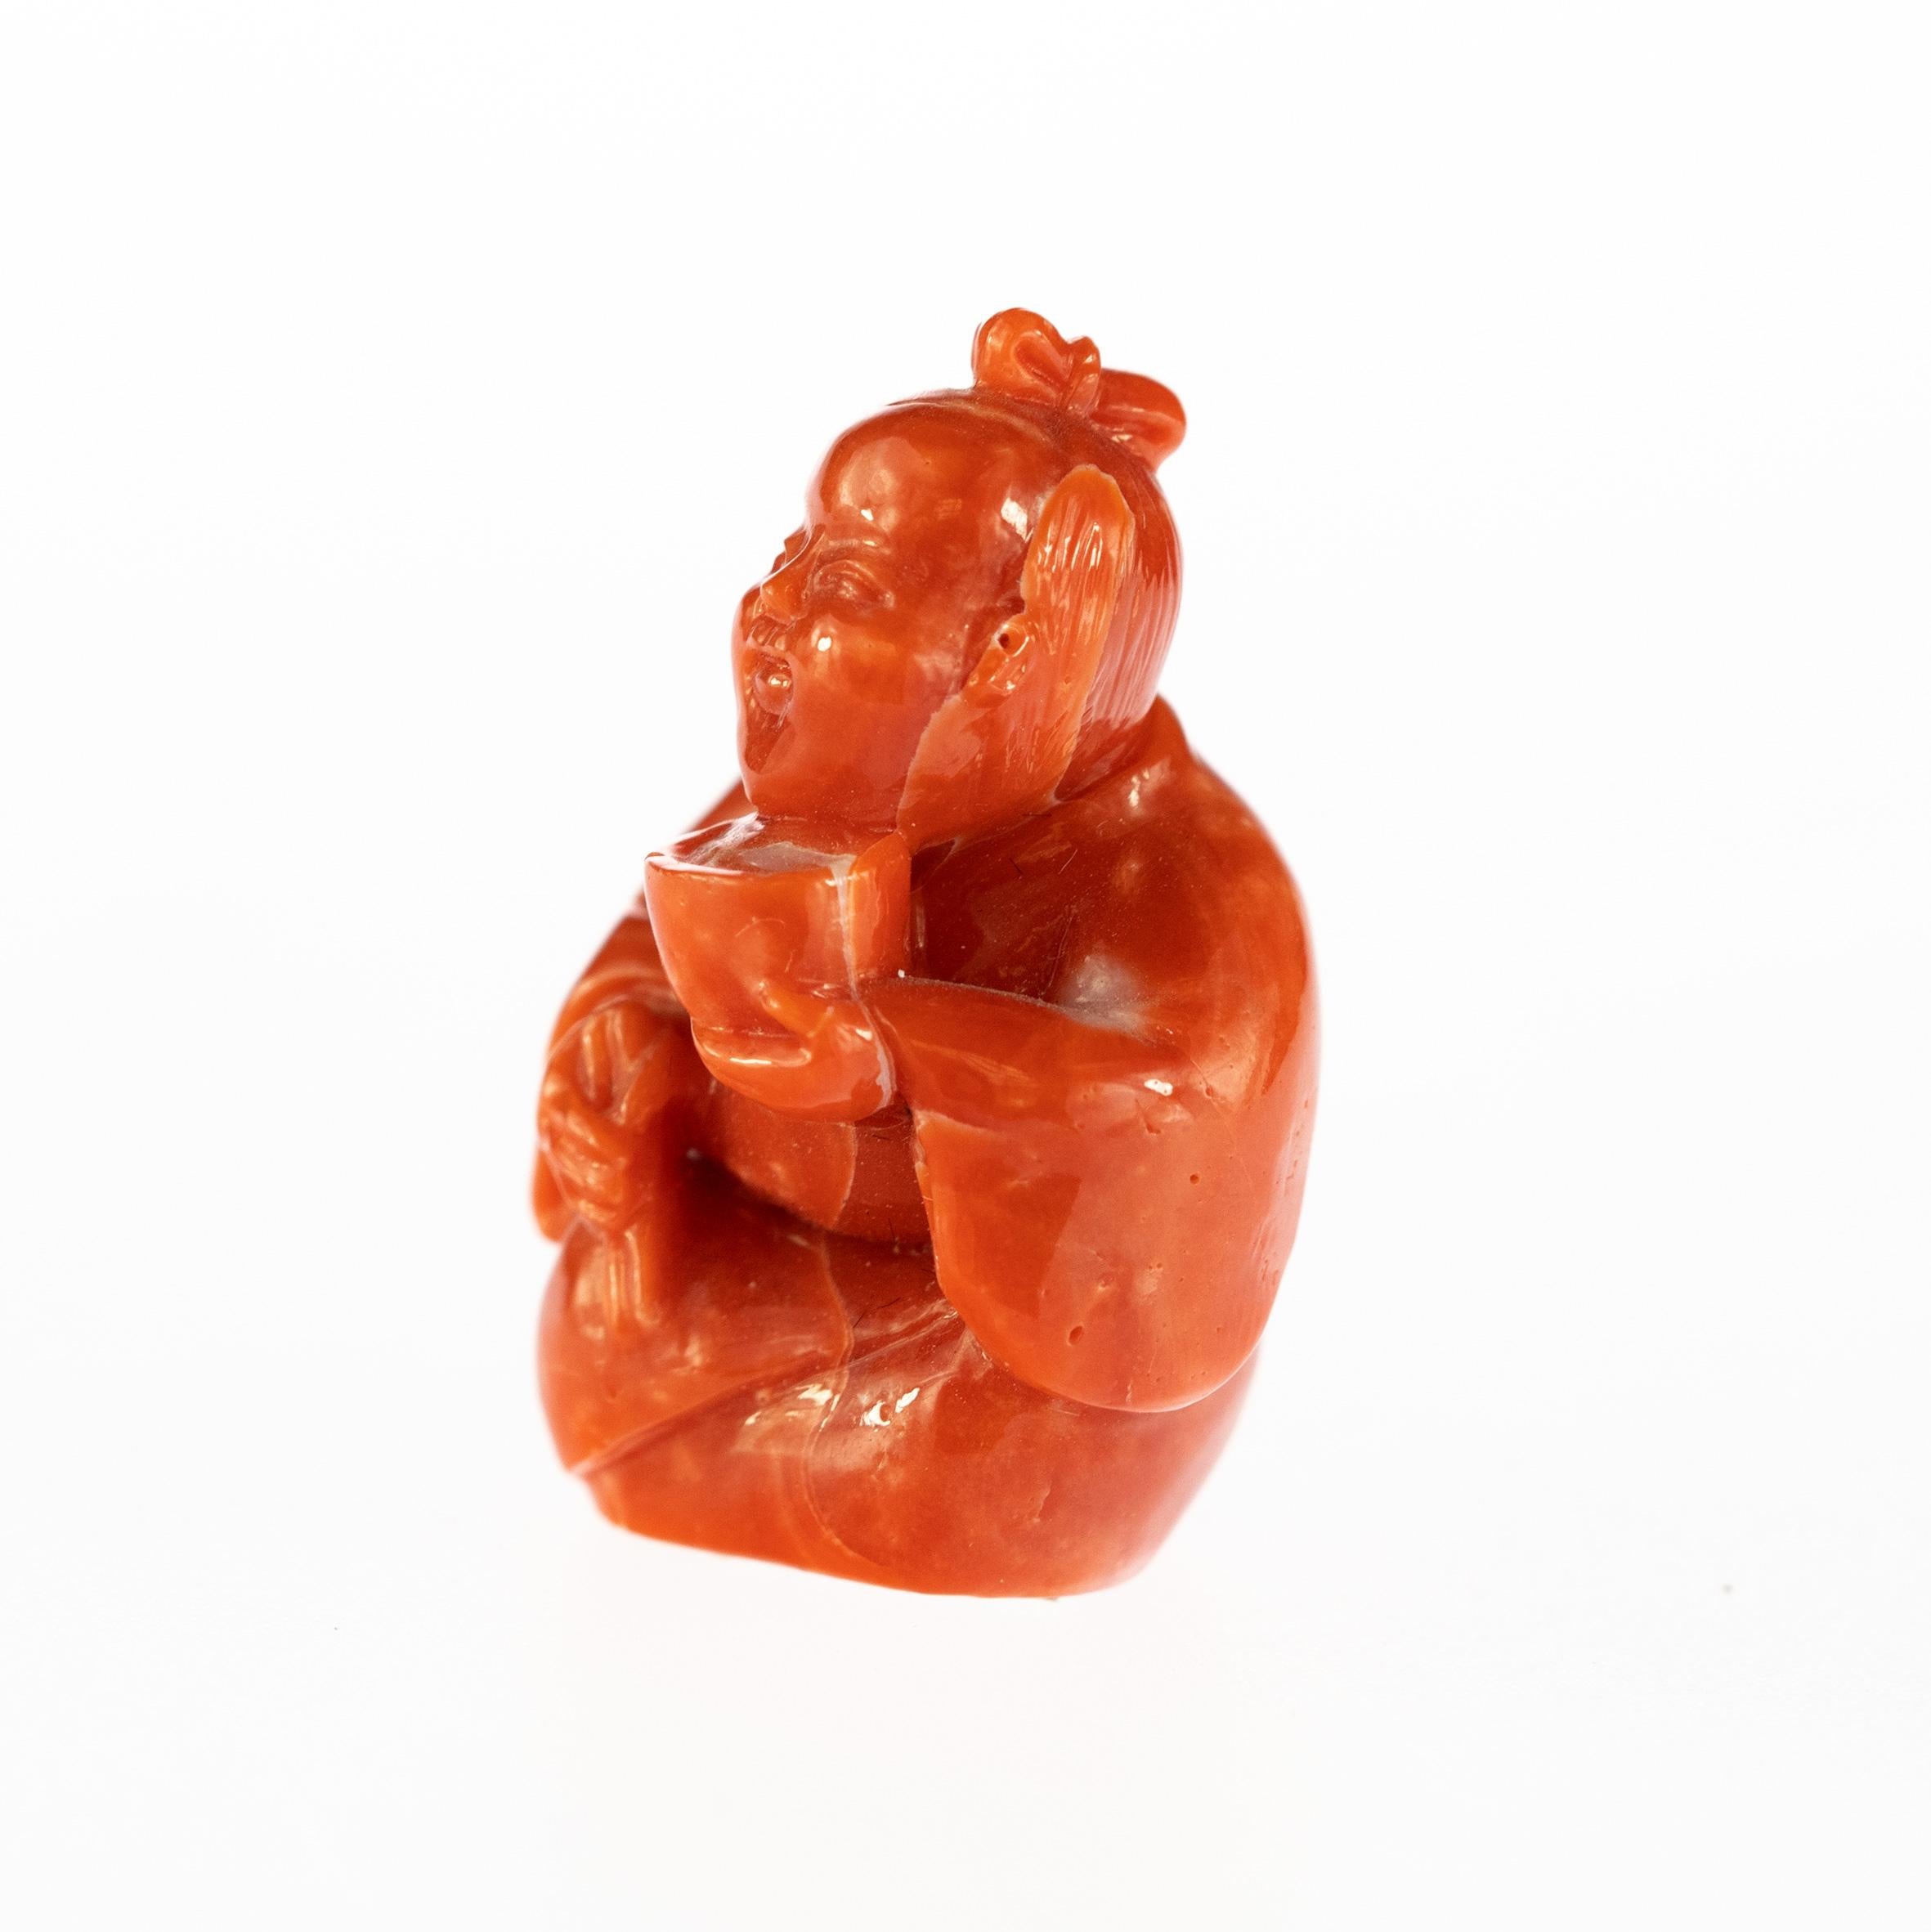 Red Coral has always been one of the most loved materials by humanity, and the level of craft in these art pieces is stunning.

These small miniatures are an example of artisan craft at its best, as you can see by the level of detail in these